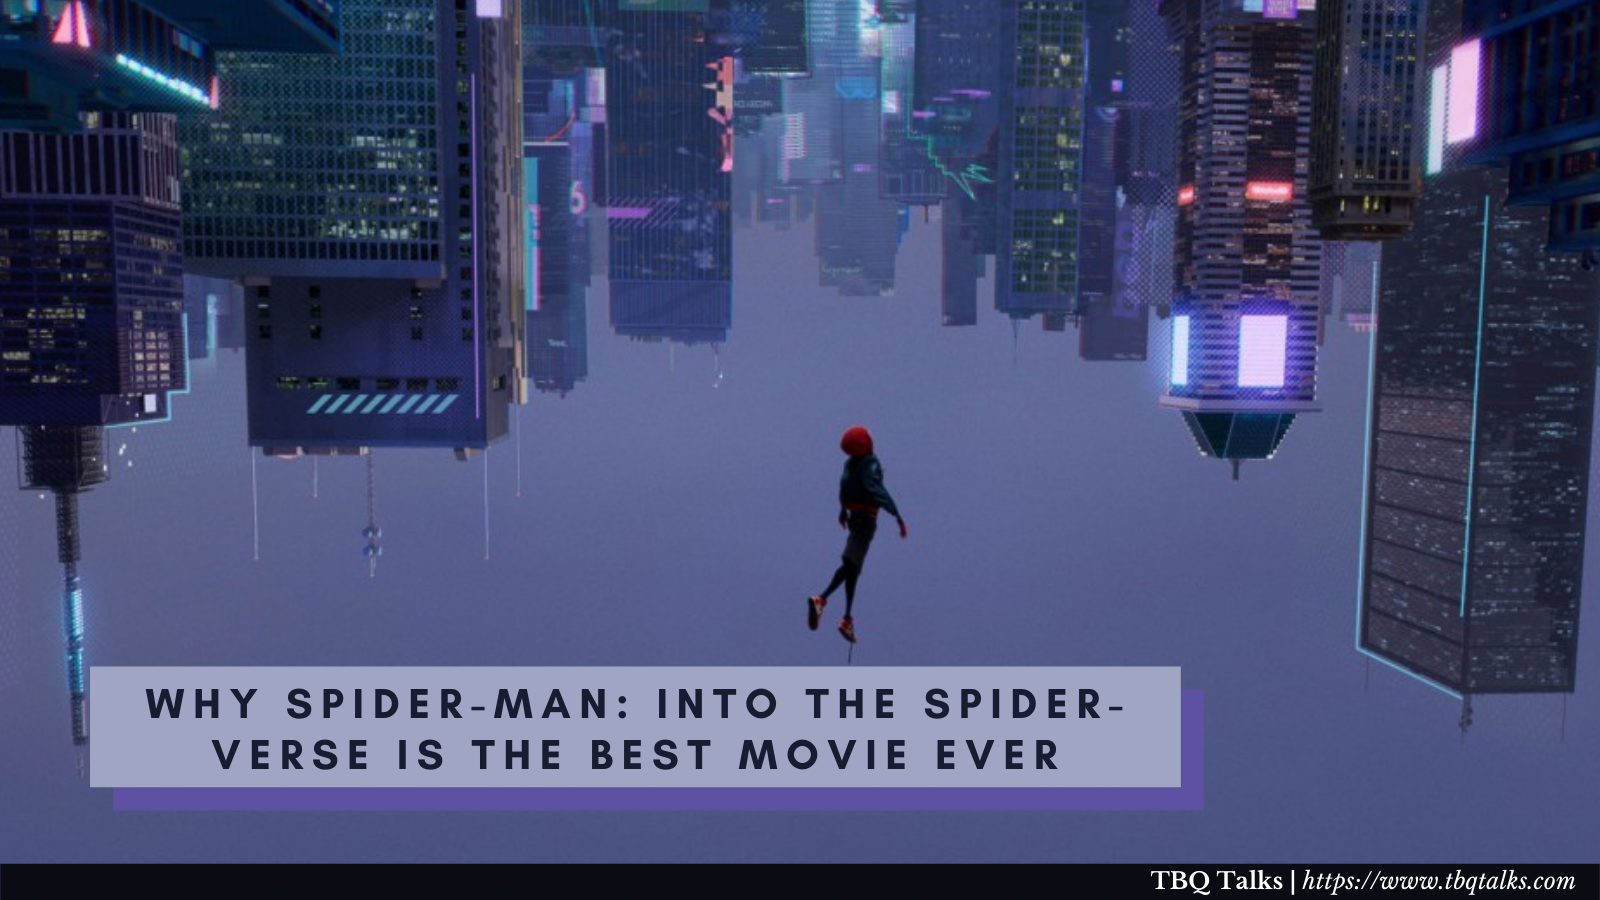 Why Spider-Man: Into the Spider-Verse is The Best Movie Ever